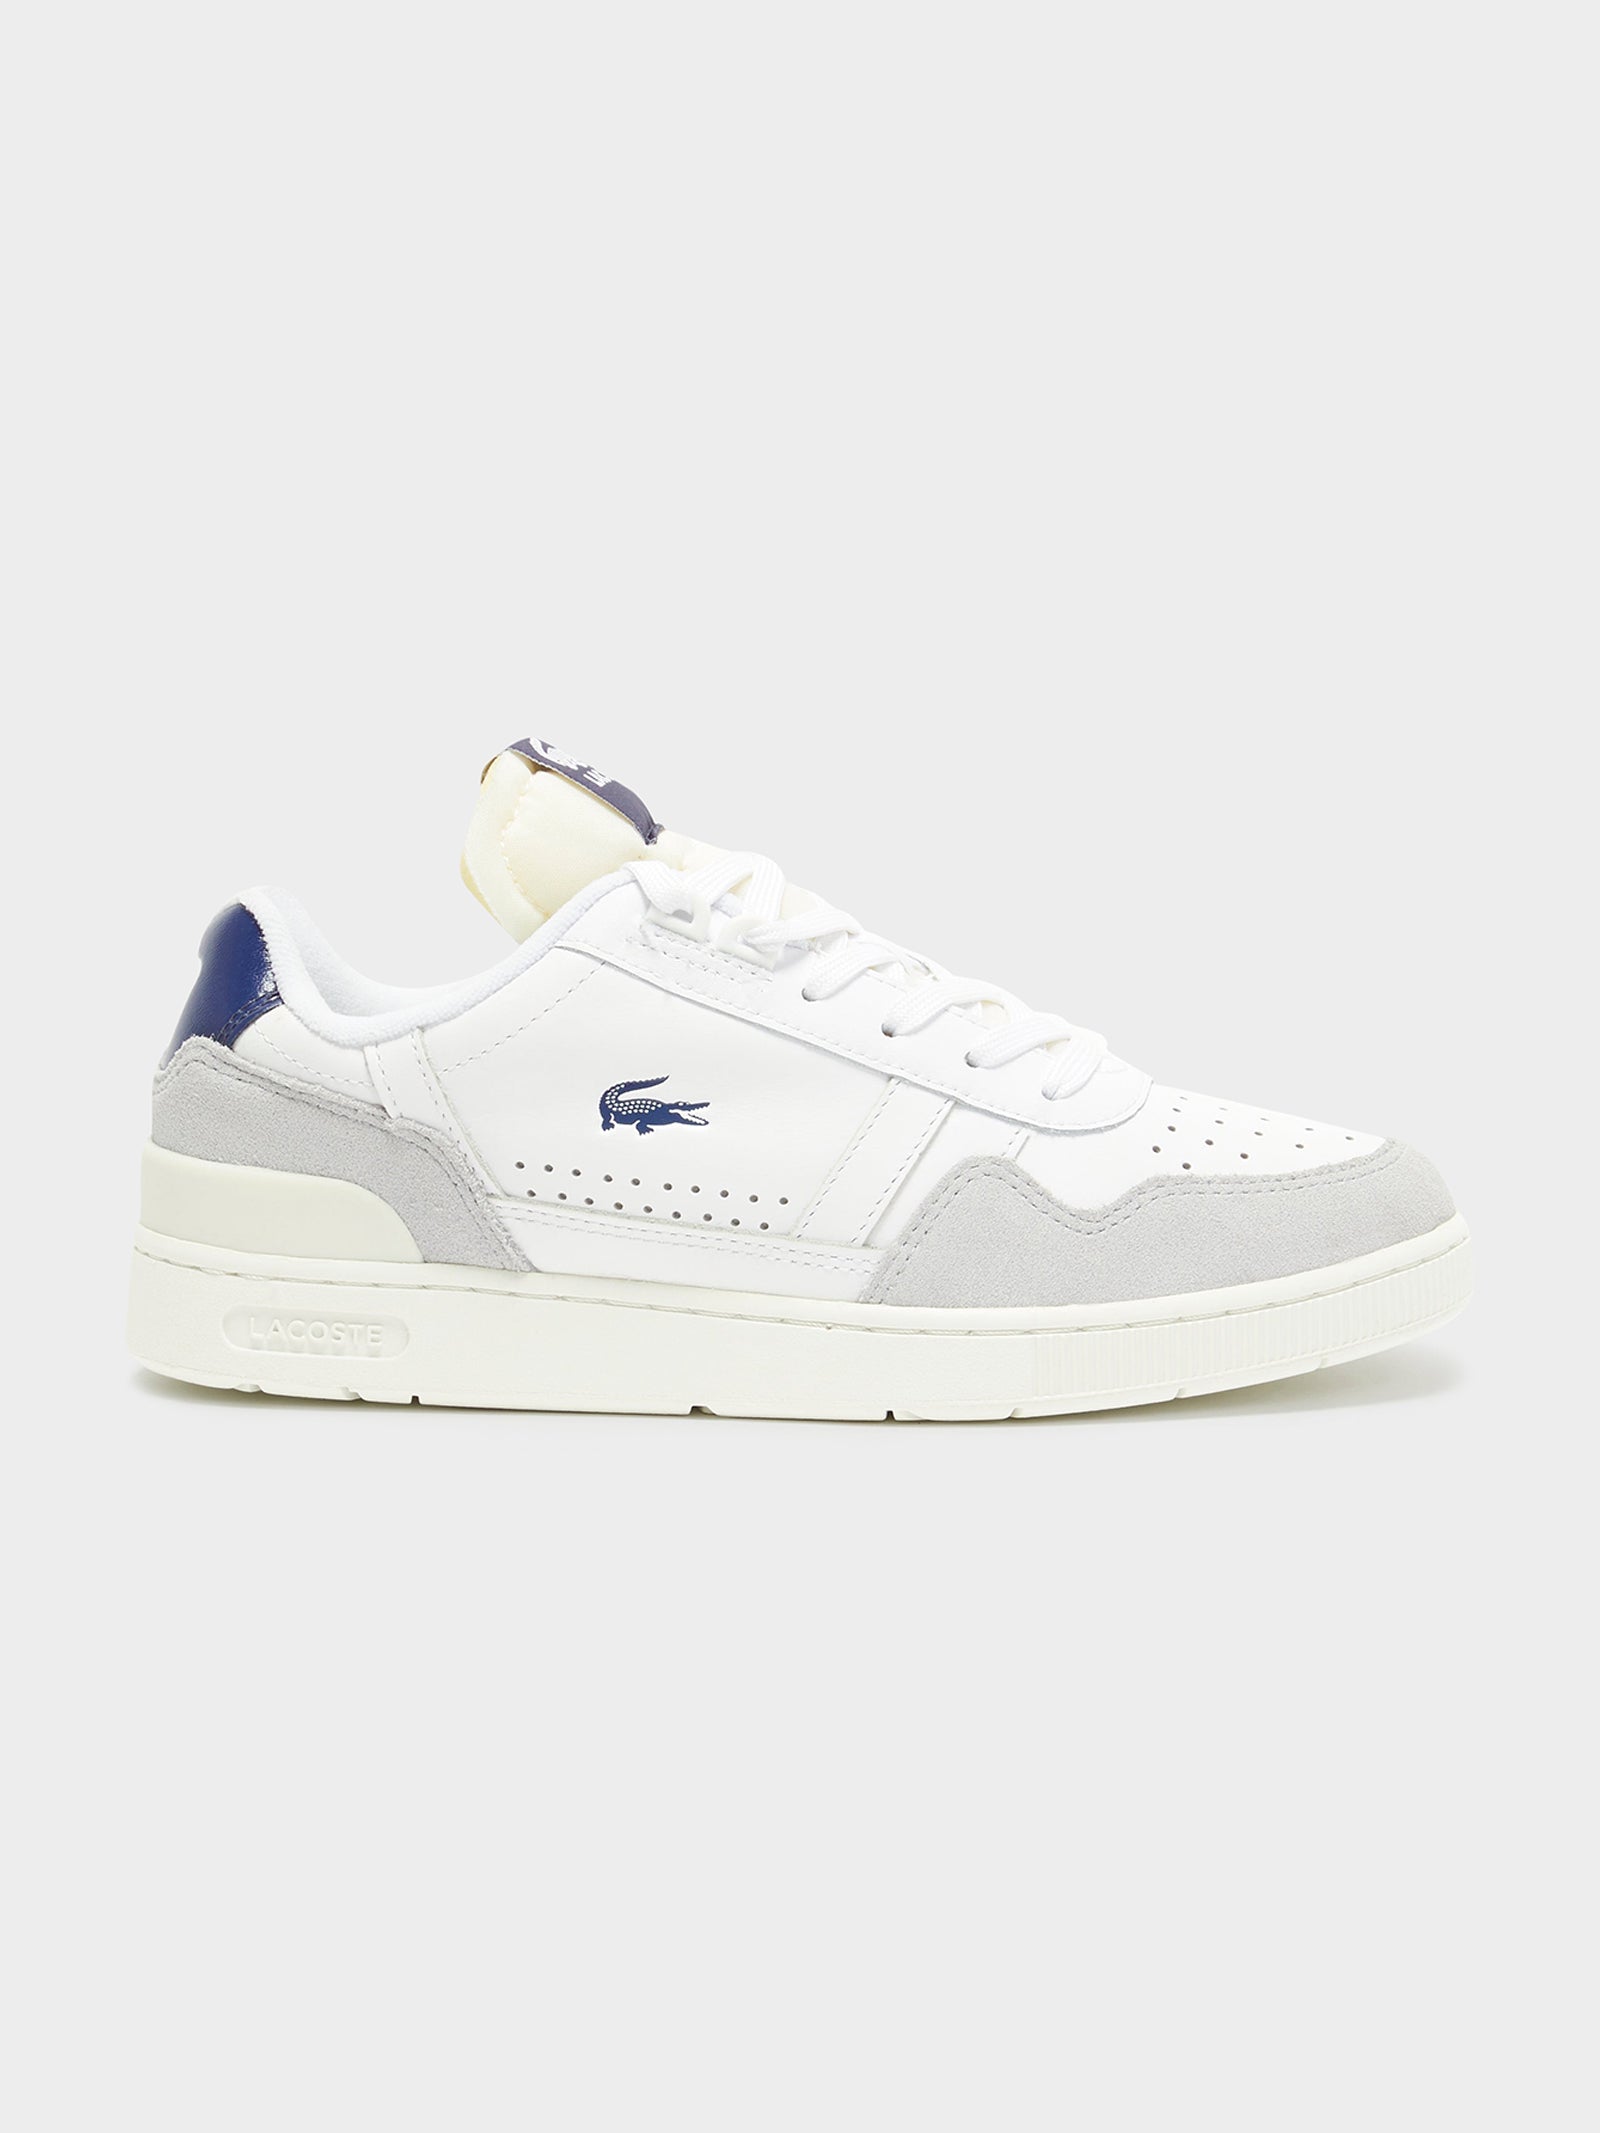 Womens T-Clip Sneakers in White & Navy - Glue Store